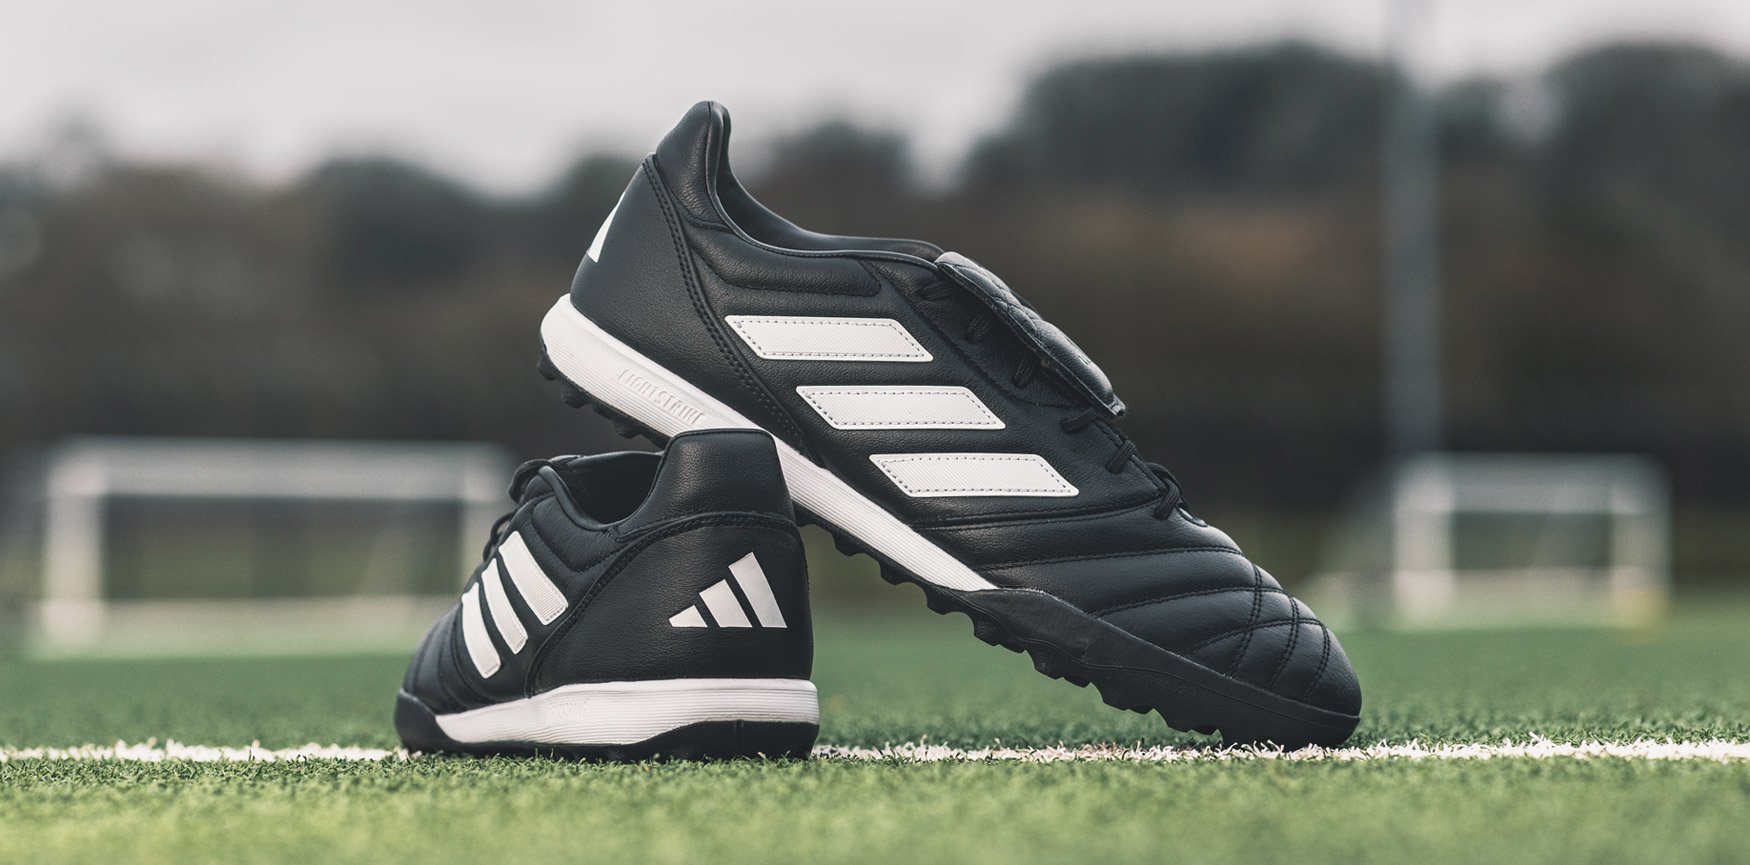 adidas Football Trainers on Astro-Turf Pitch in Black & White